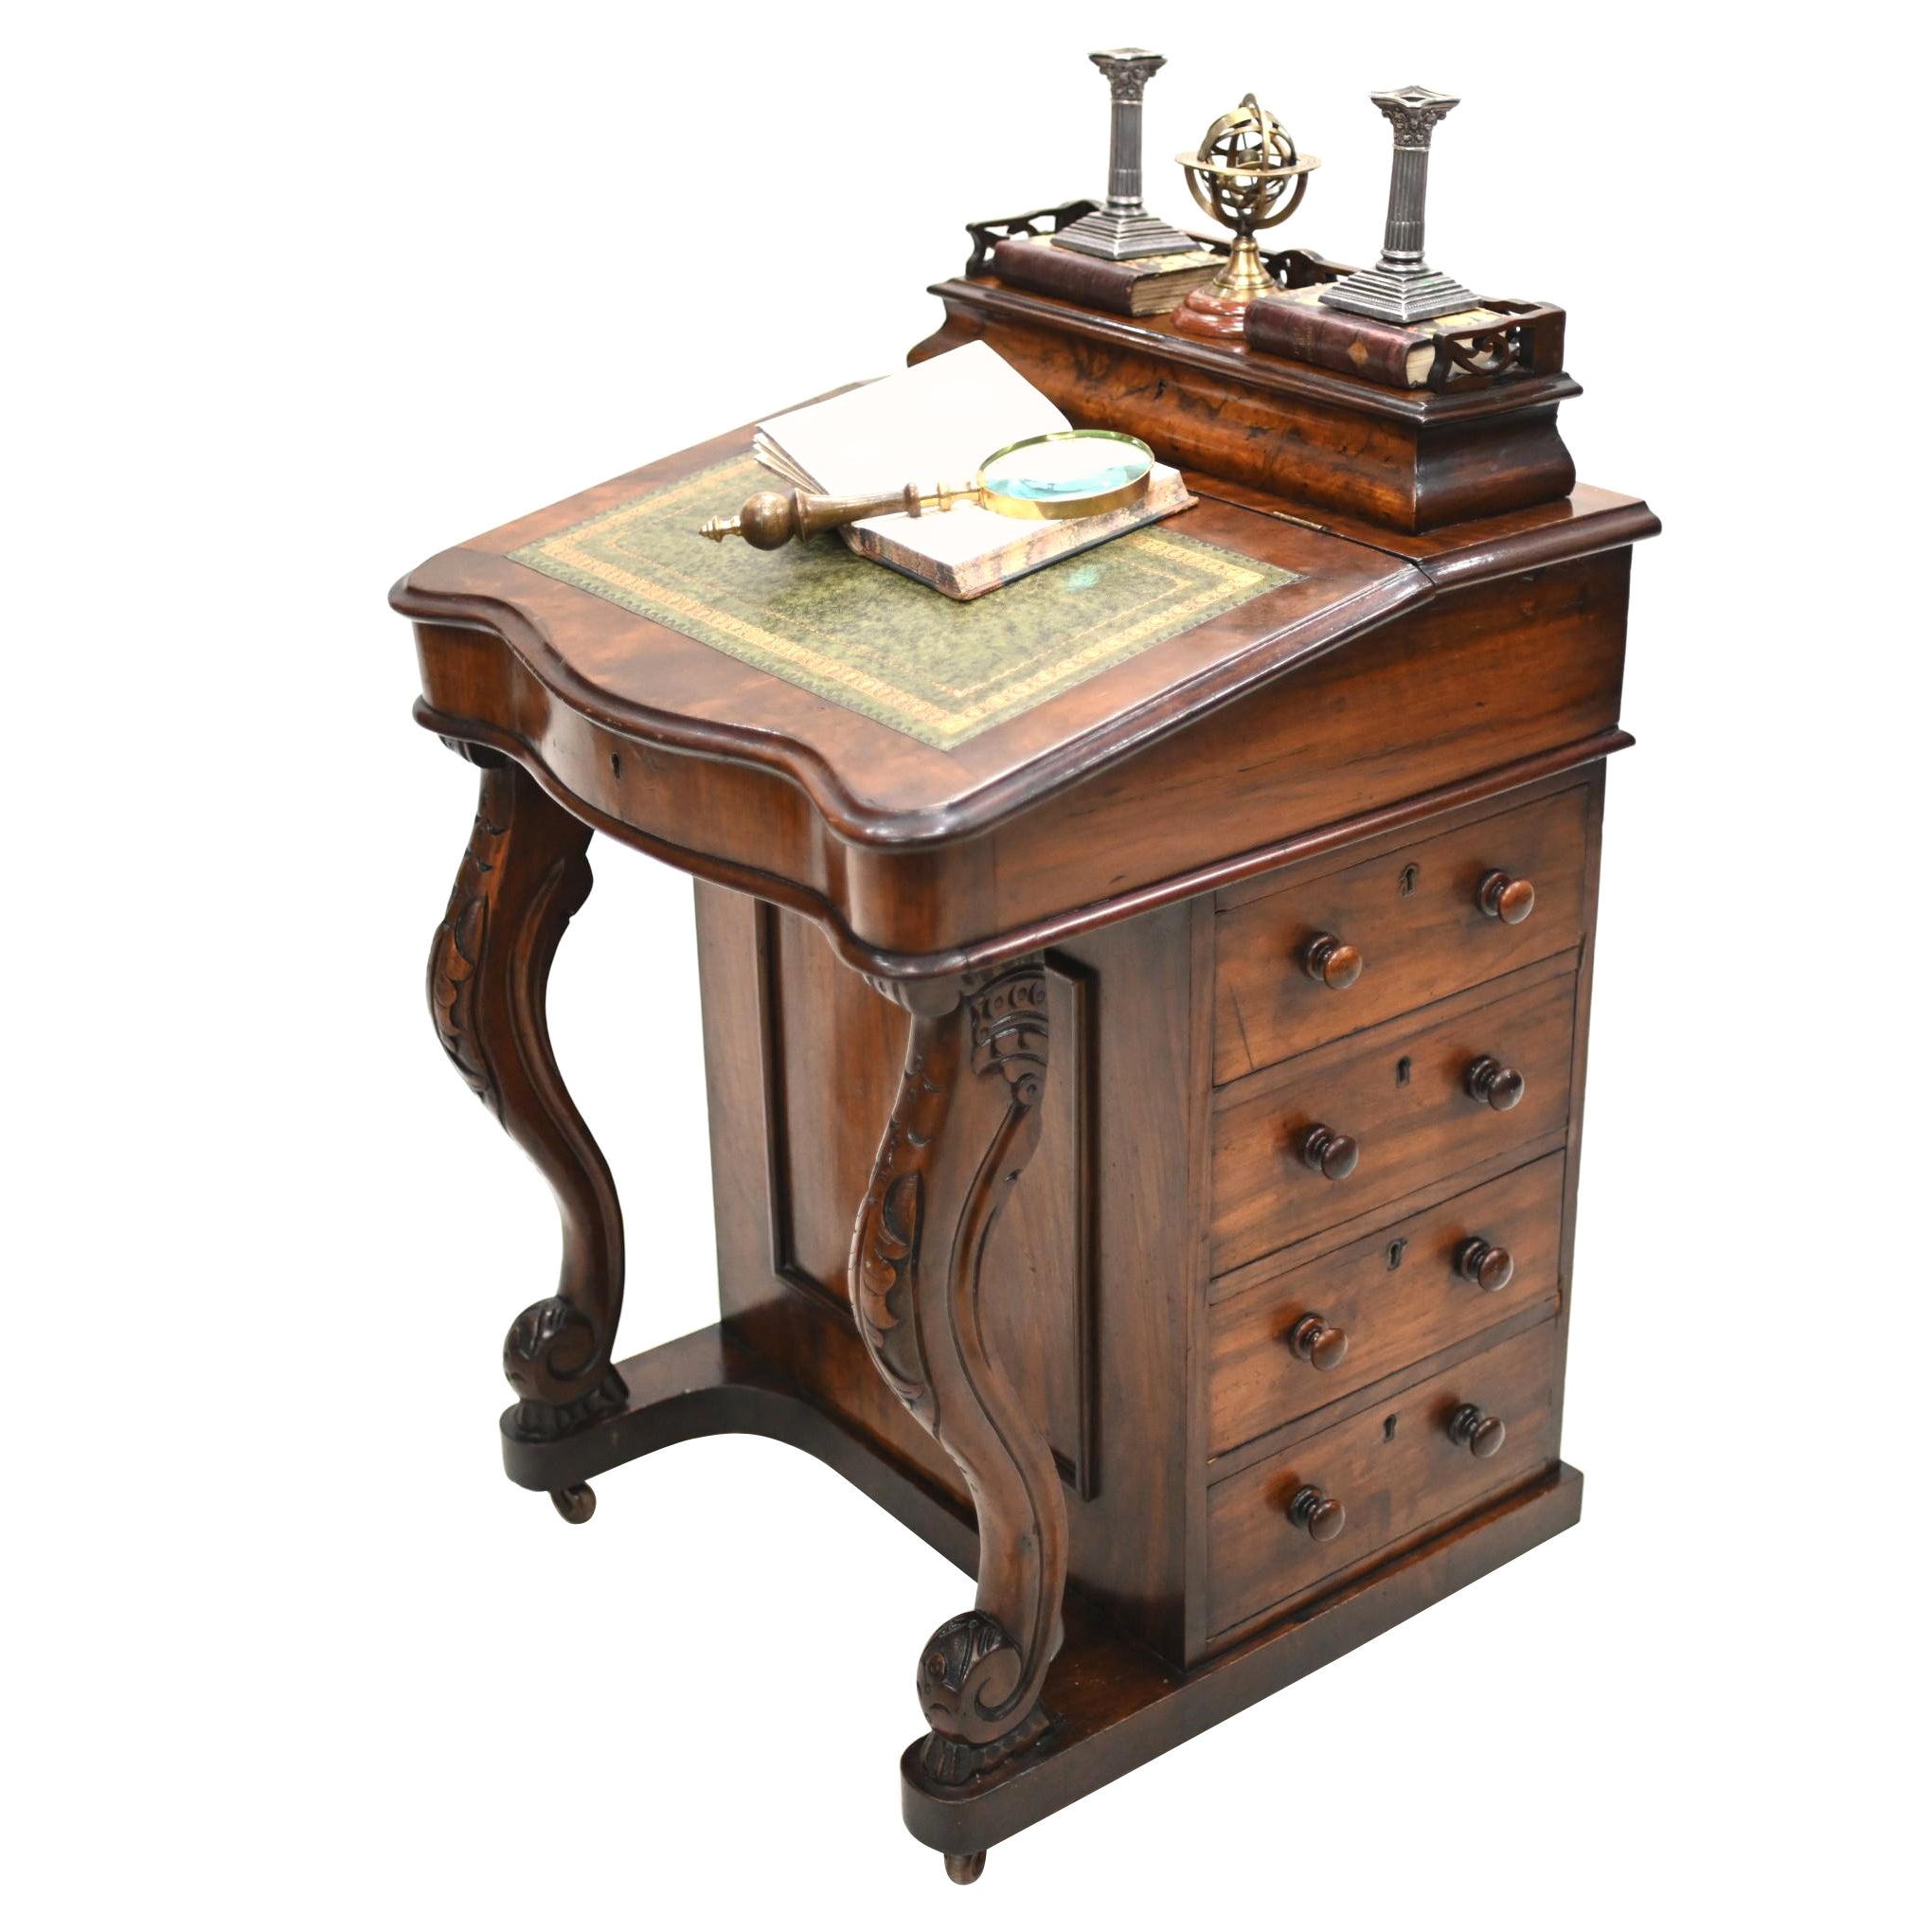 What is a Davenport desk used for?